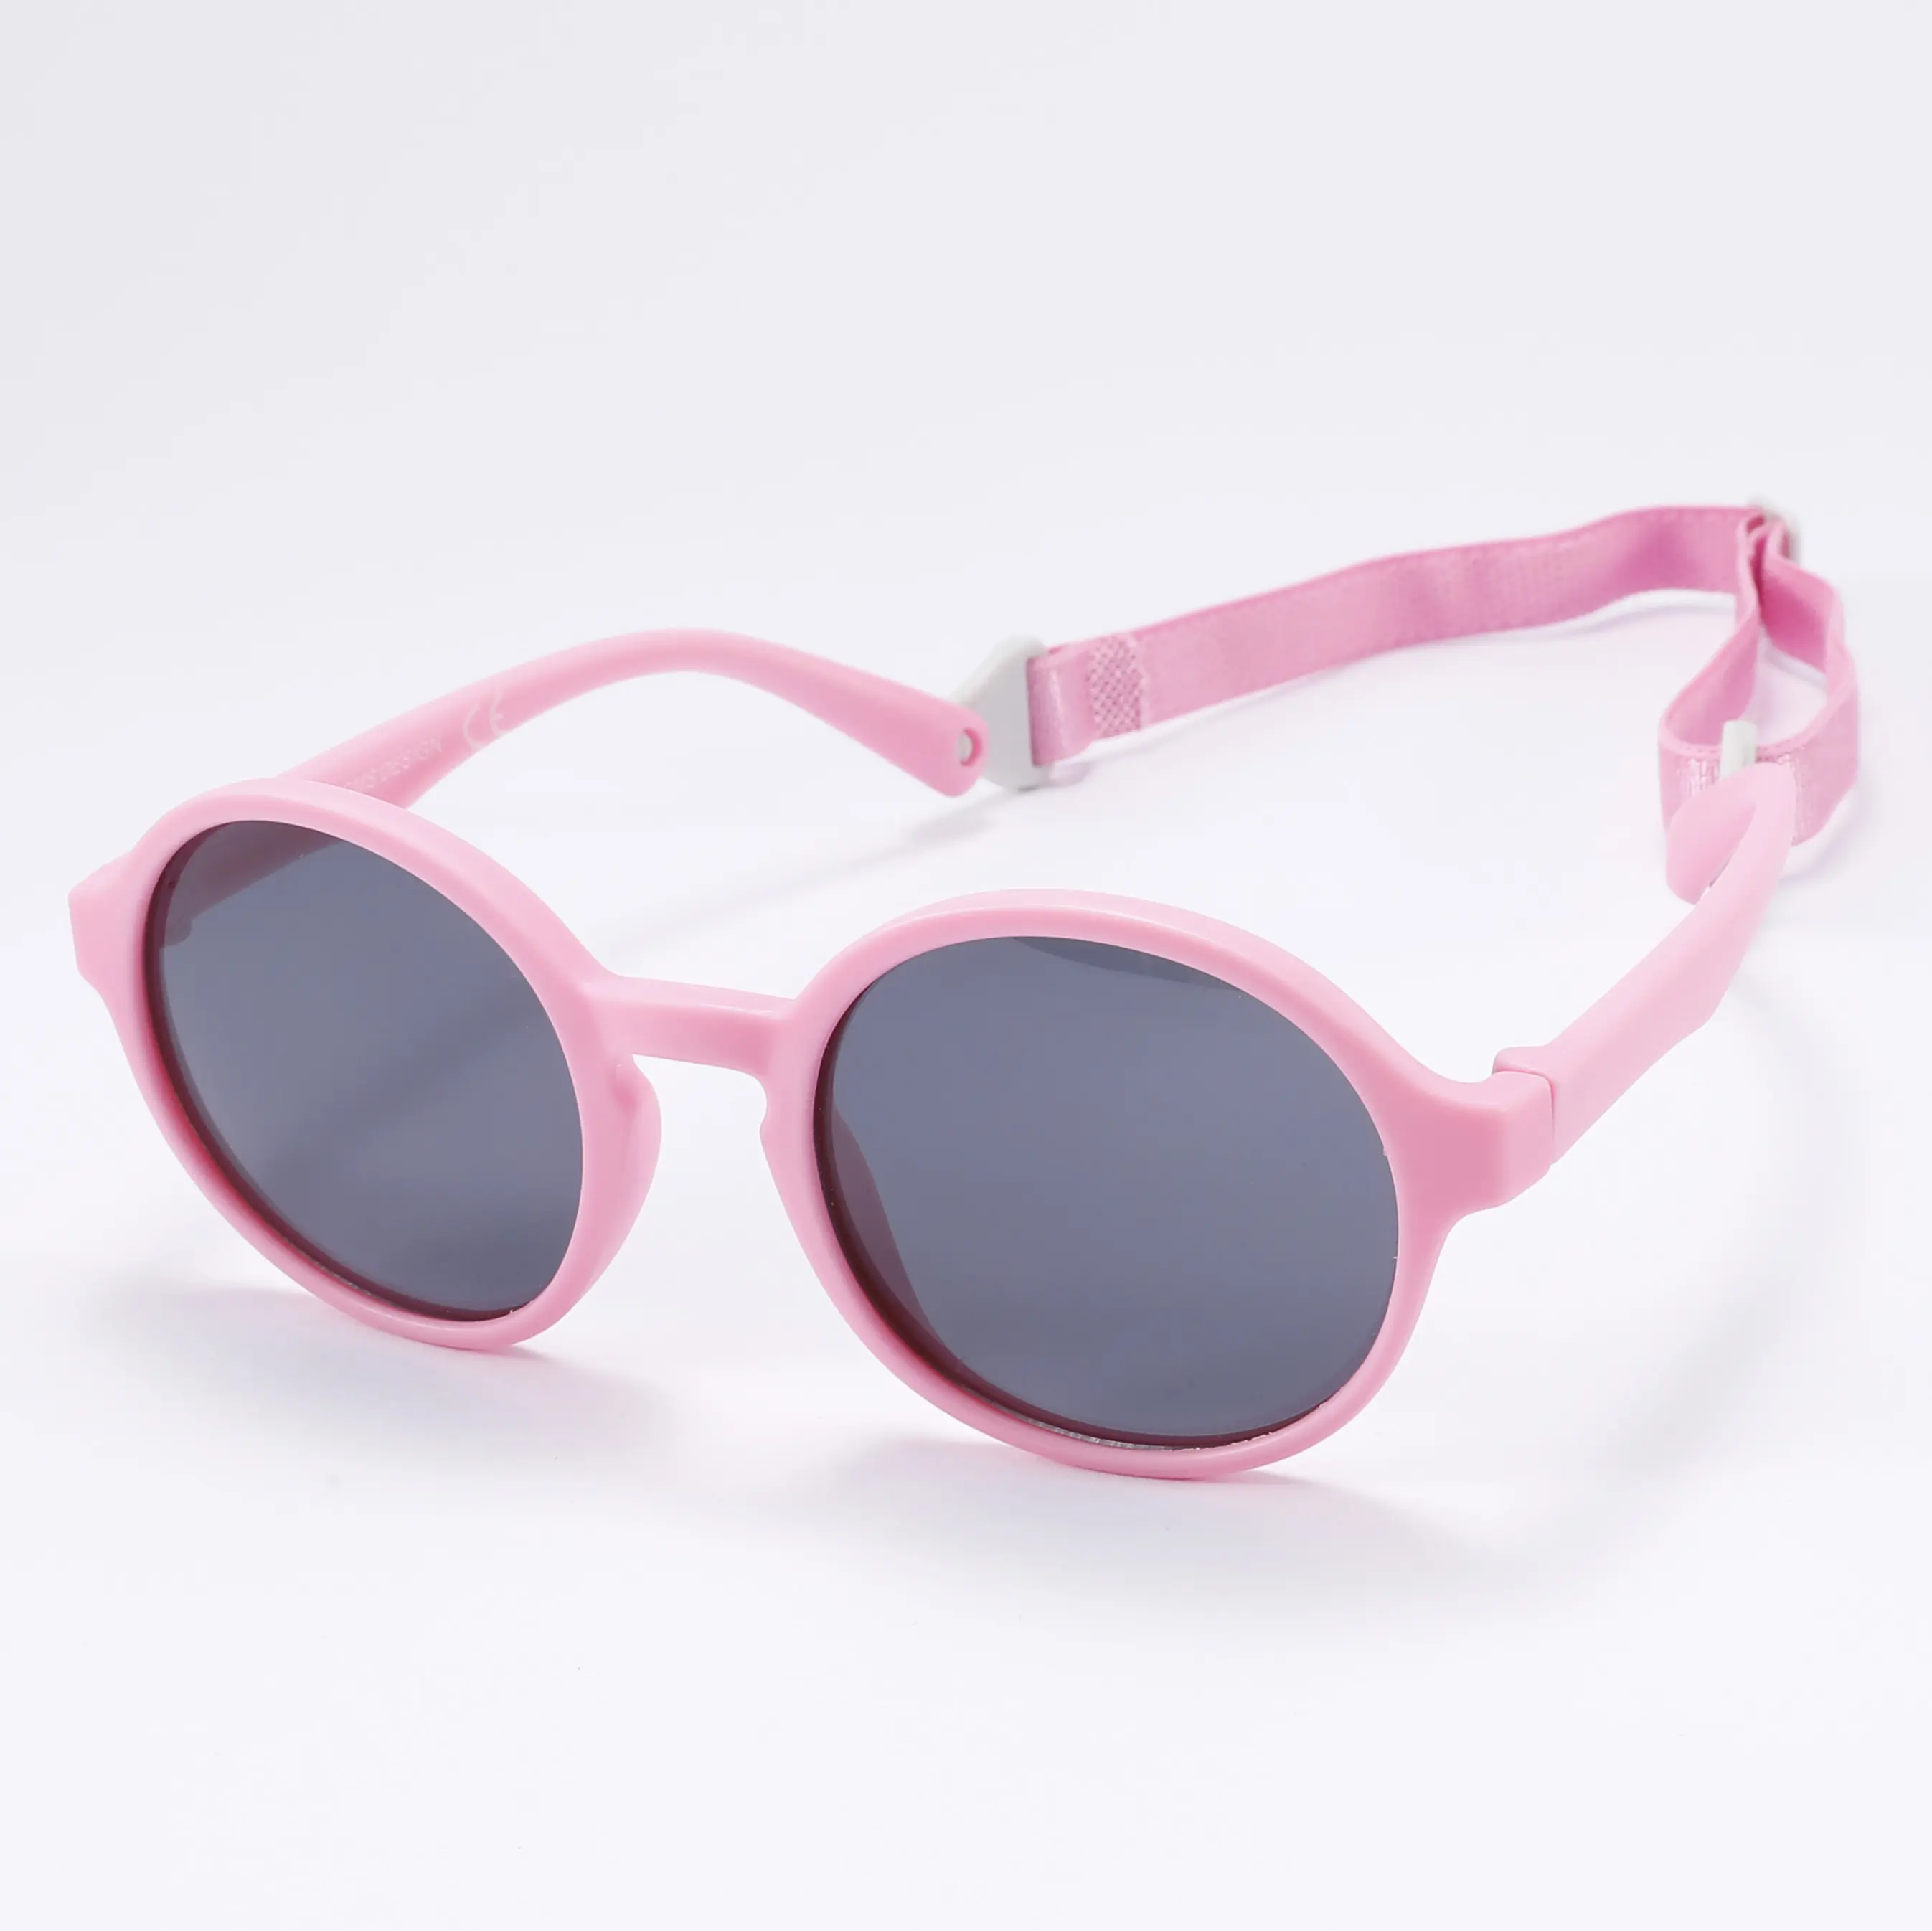 Fashion Safety Uv400 Soft Flexible Rubber Round Frame Polarized Kids Sun Glasses Little Girls Toddler Baby Sunglasses With Strap